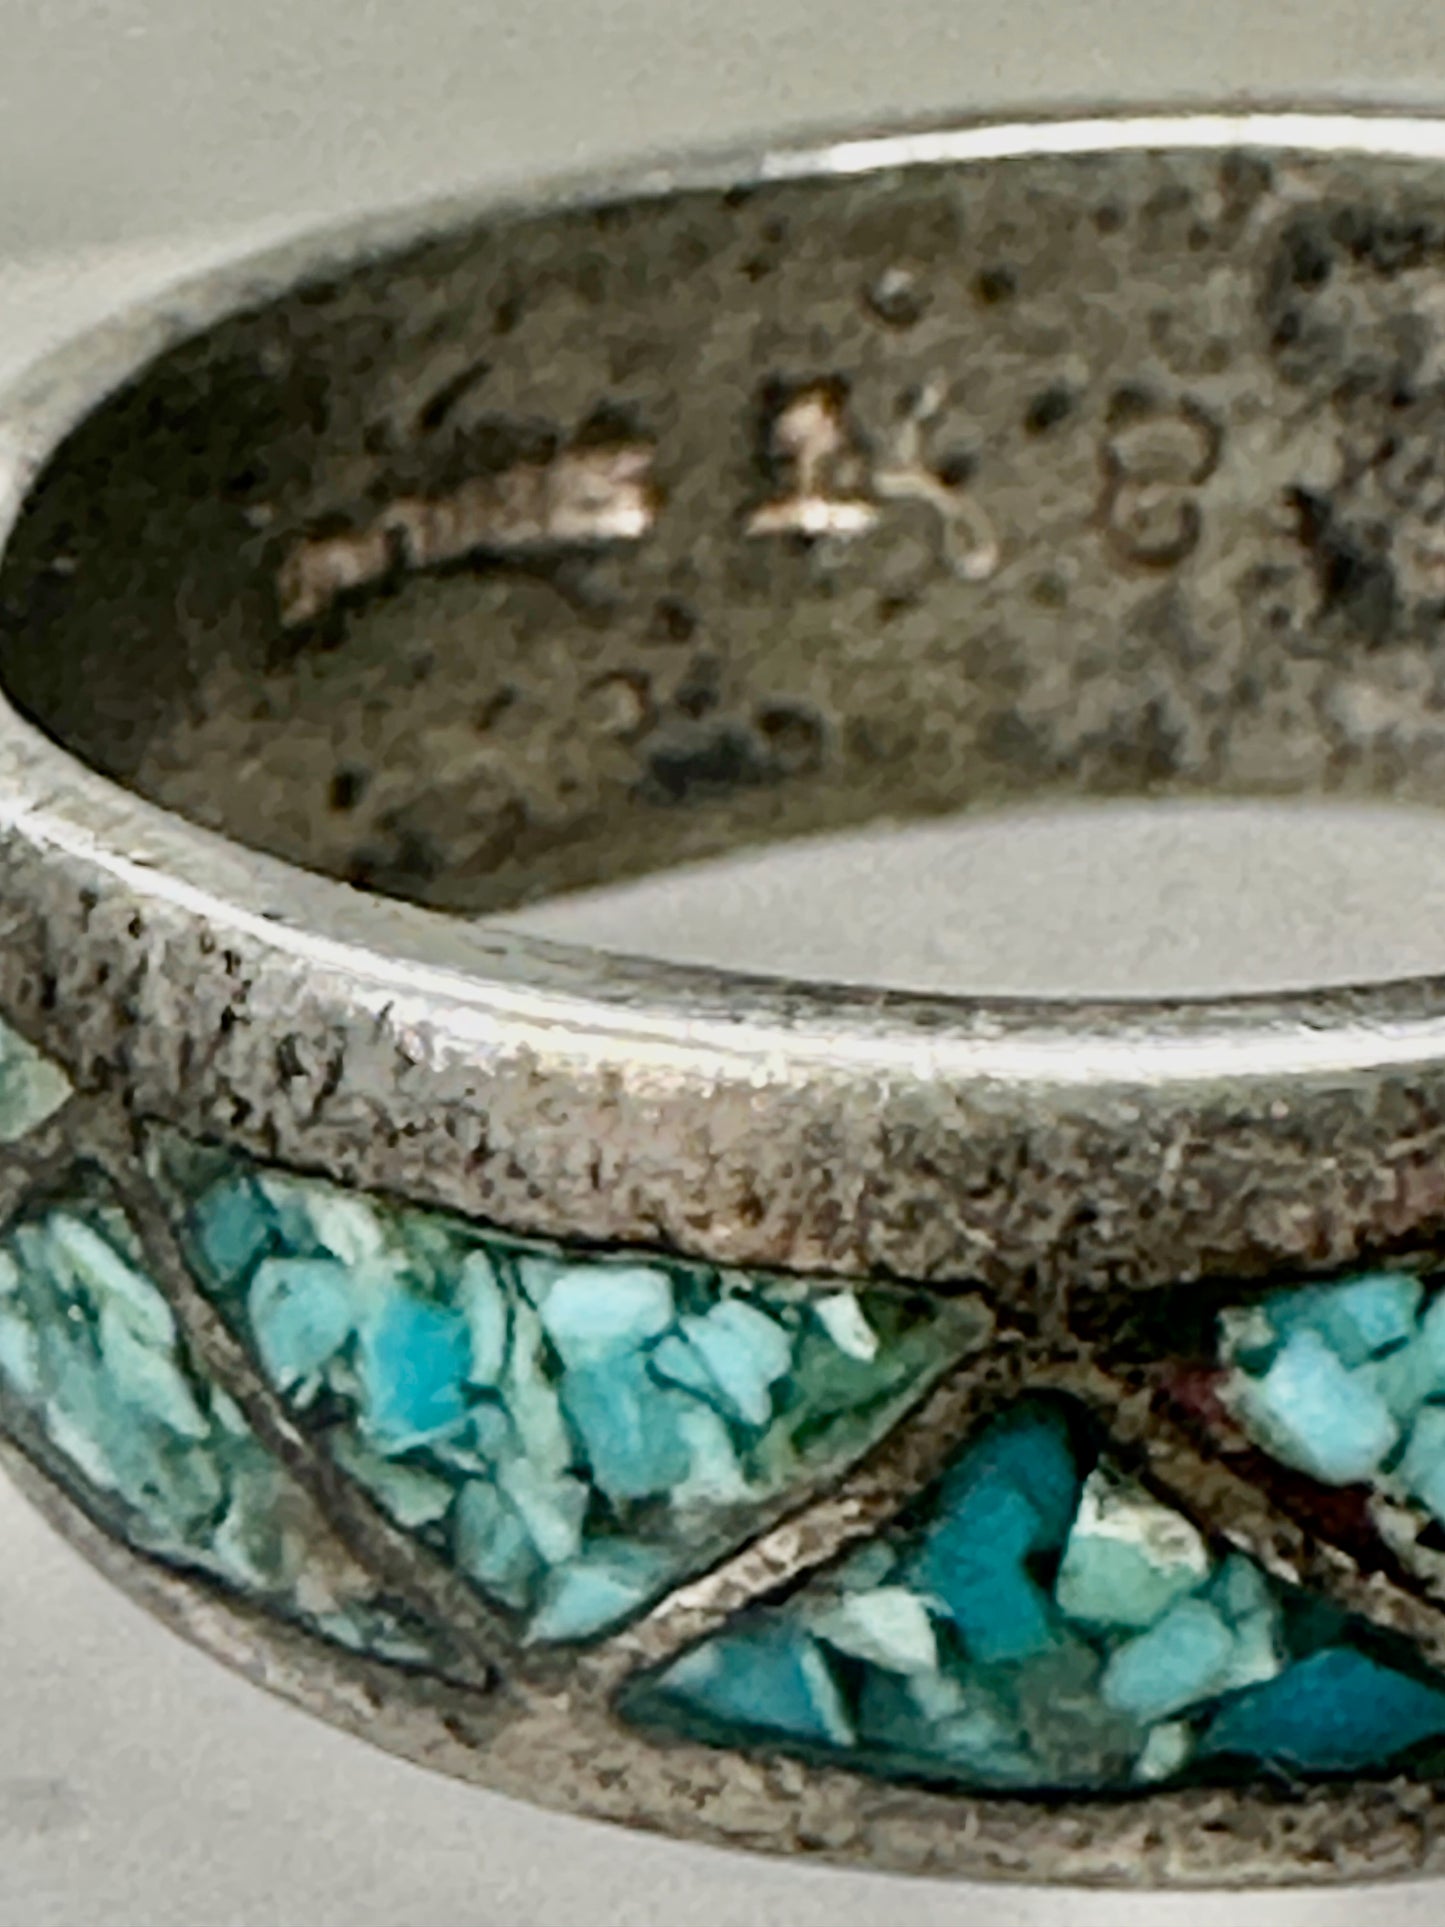 Zuni ring turquoise chips band size 8 sterling silver women men